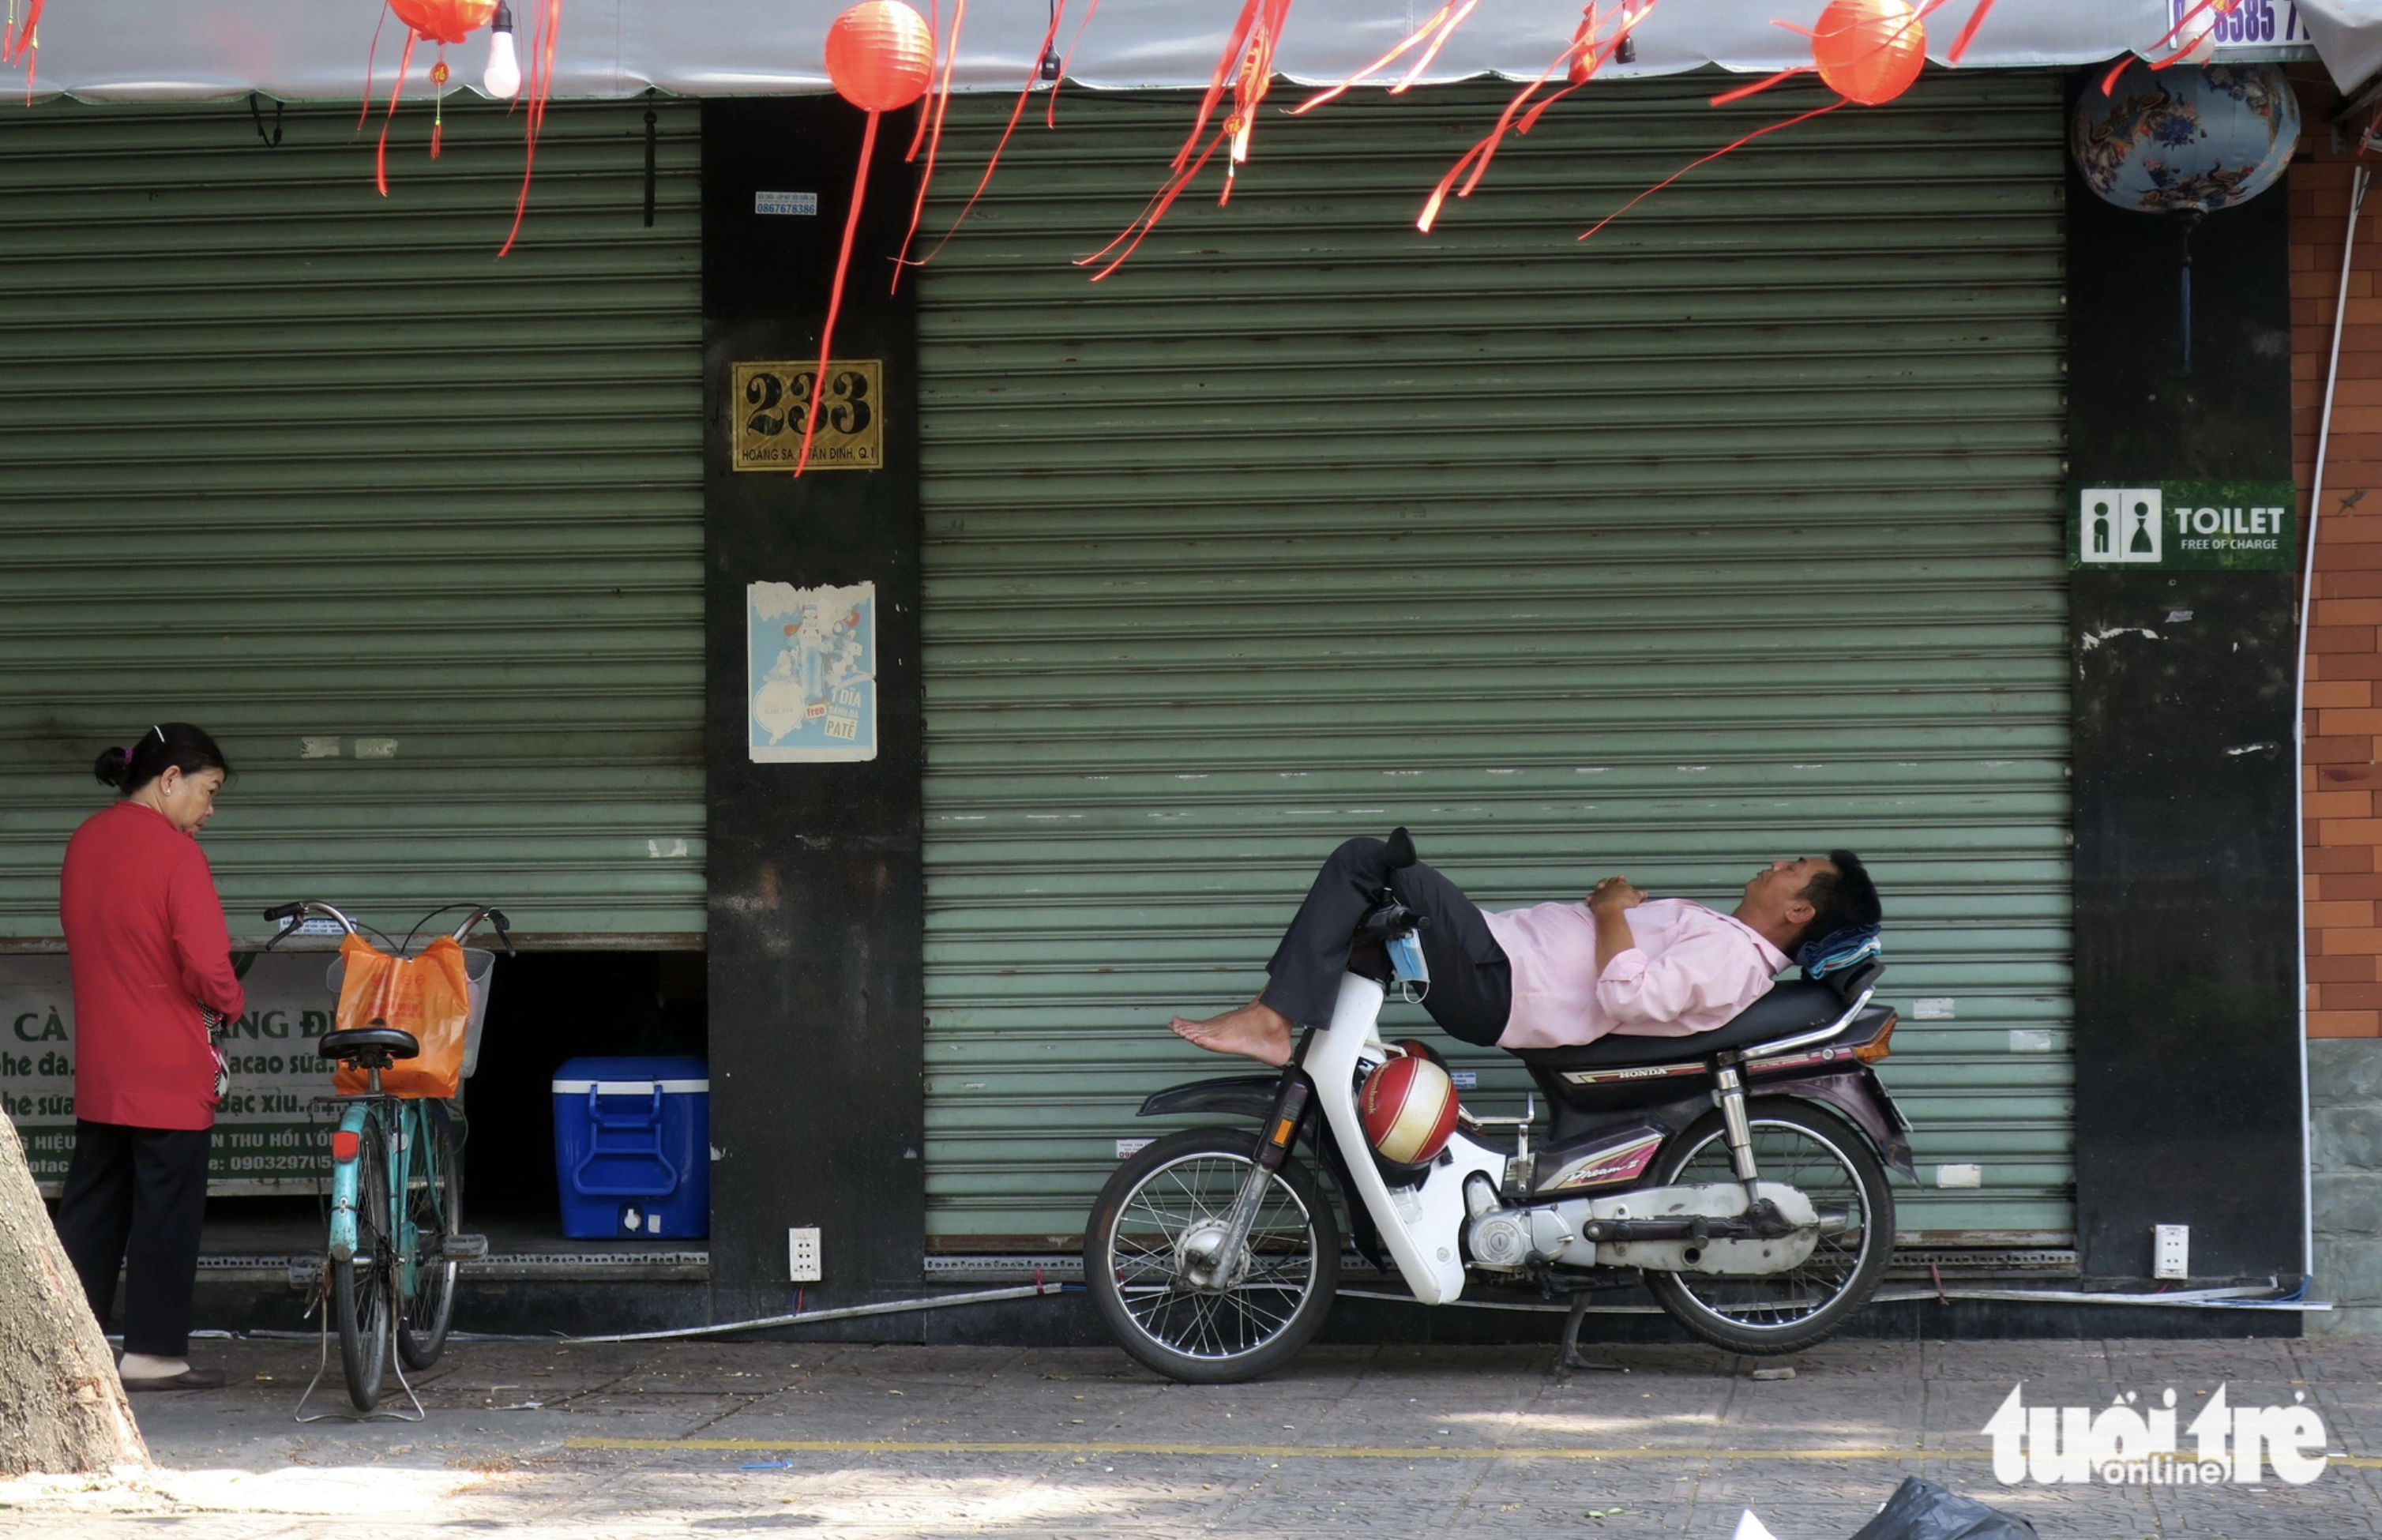 A motorcycle taxi driver takes a rest on his motorcycle in the shade of a house roof on Truong Sa Street in District 1. Photo: T.T.D. / Tuoi Tre